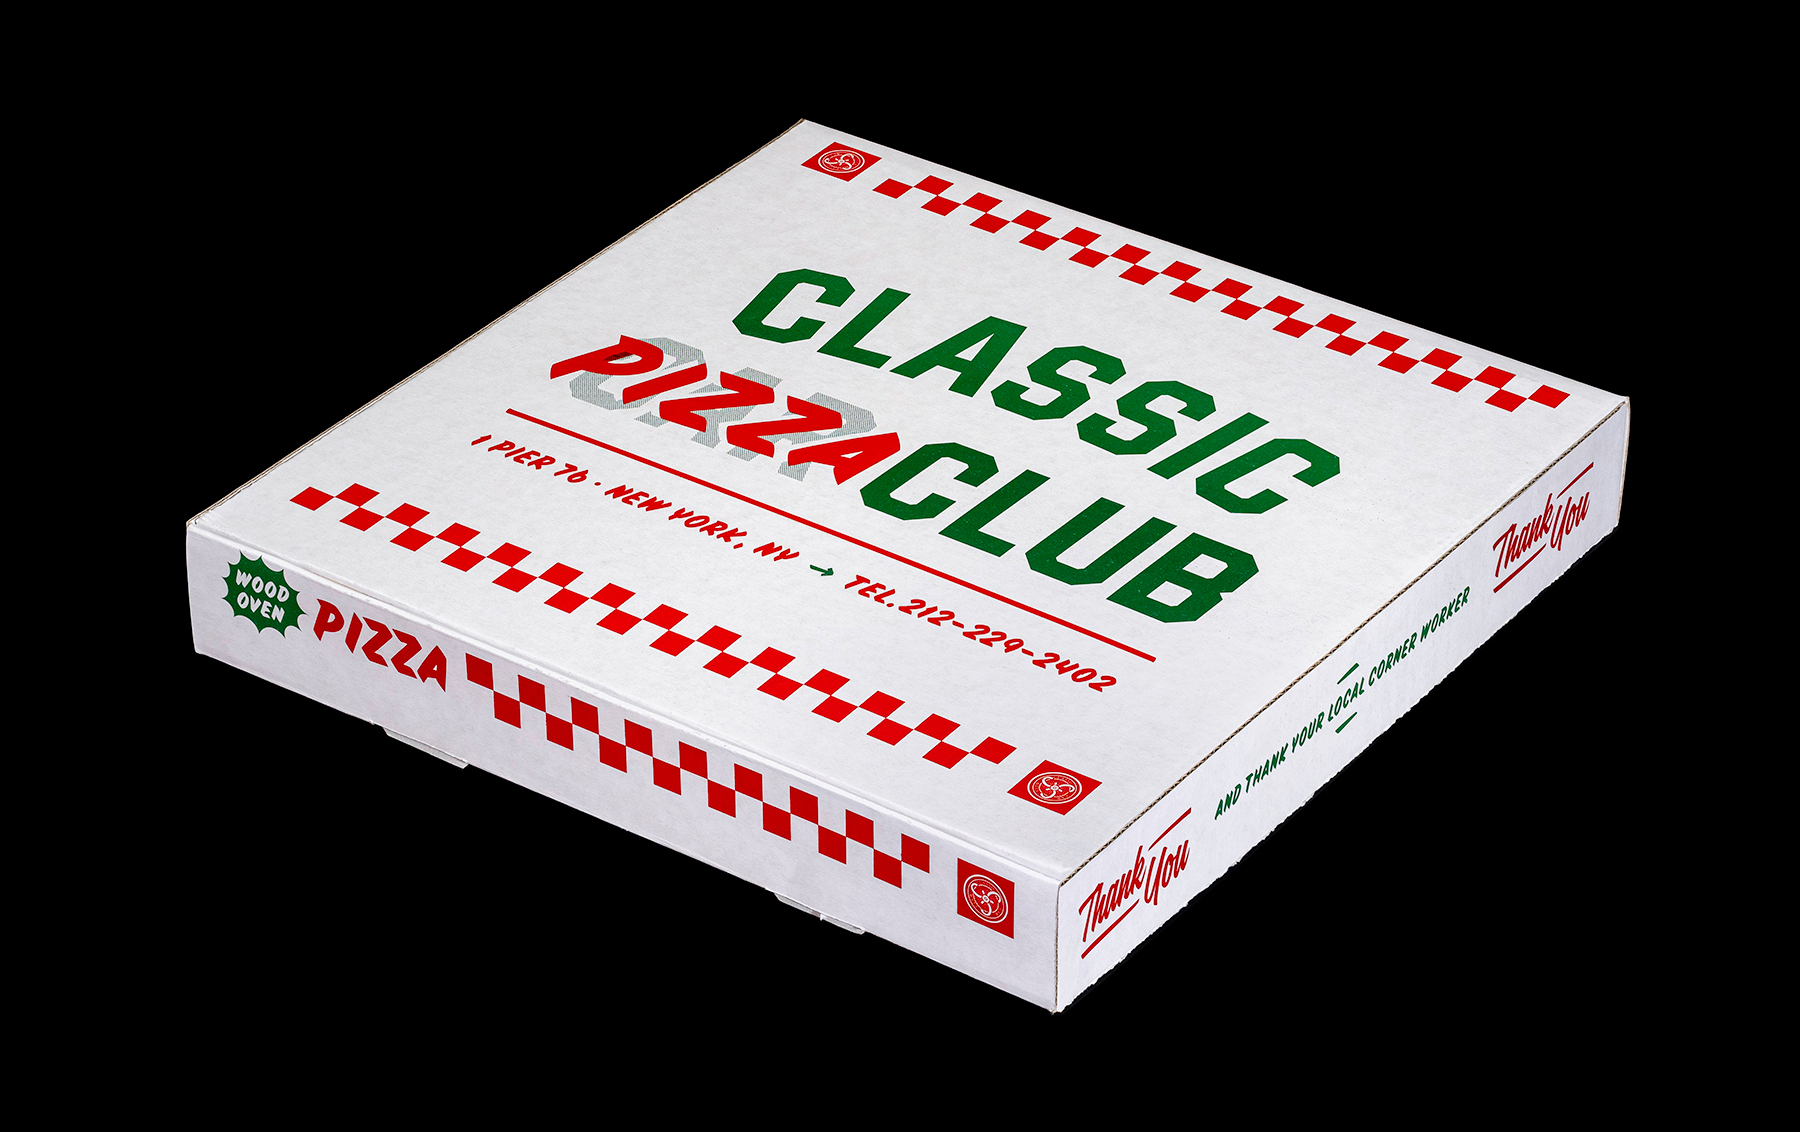 View the Classic Pizza Club case study